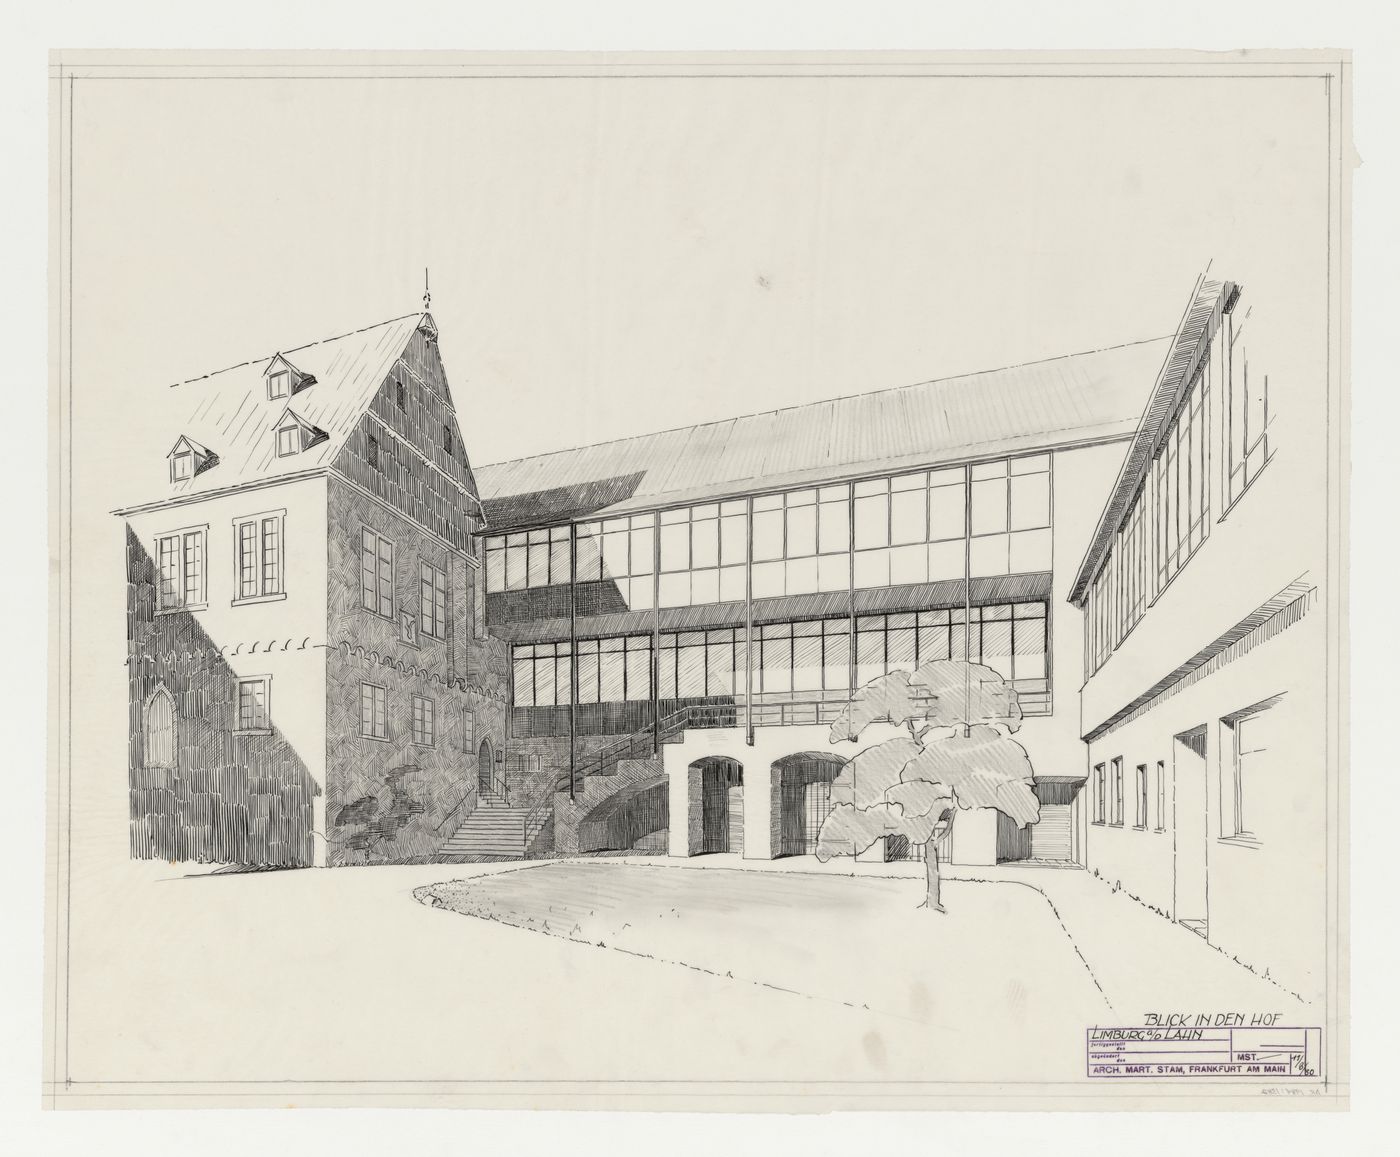 Perspective for a courtyard for an addition to an existing building, possibly a school, Limburg an der Lahn, Germany